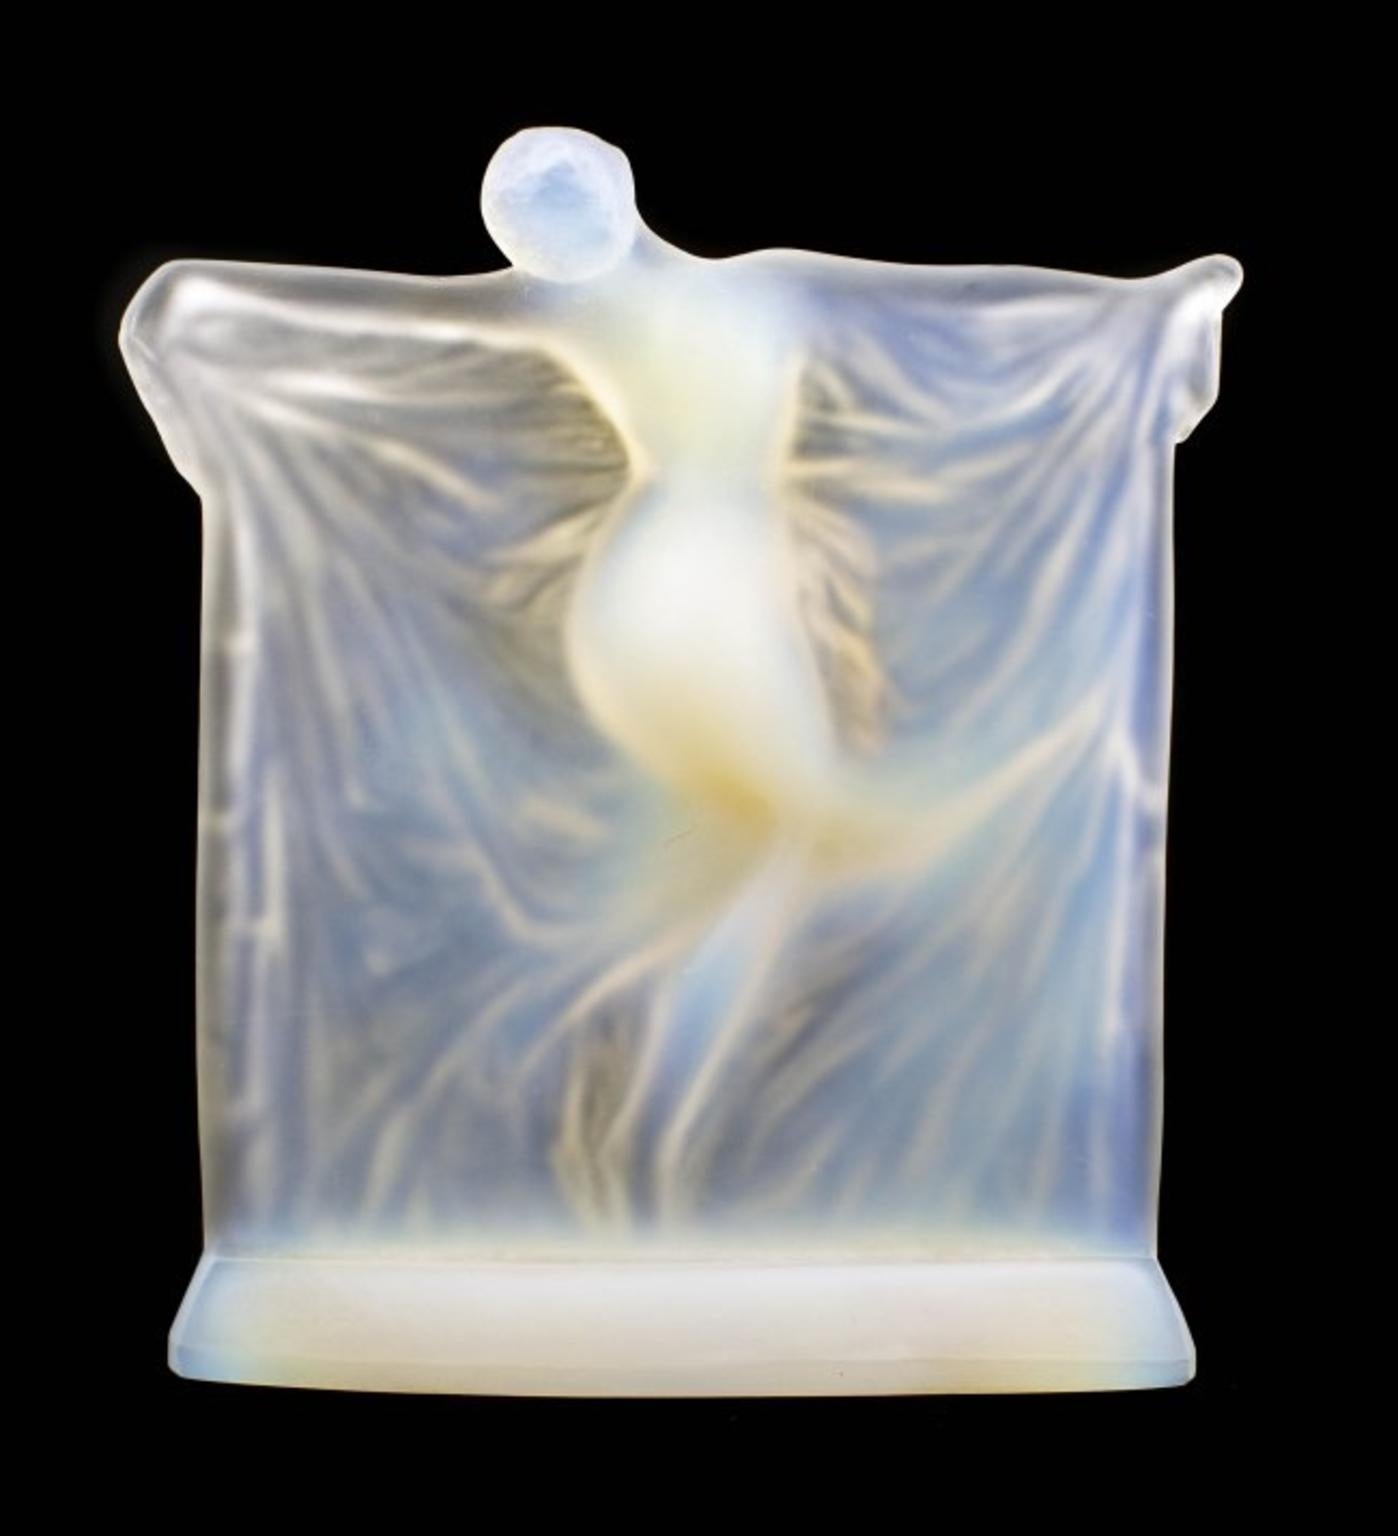 Thais opalescent glass statuette, René Lalique
An opalescent glass statuette, the nude female figure dancing and holding up a large diaphanous drapery
Marcilhac Reference 834.
Model introduced 1925
Measure: 8.4 in (21 cm) high
Inscribed R.